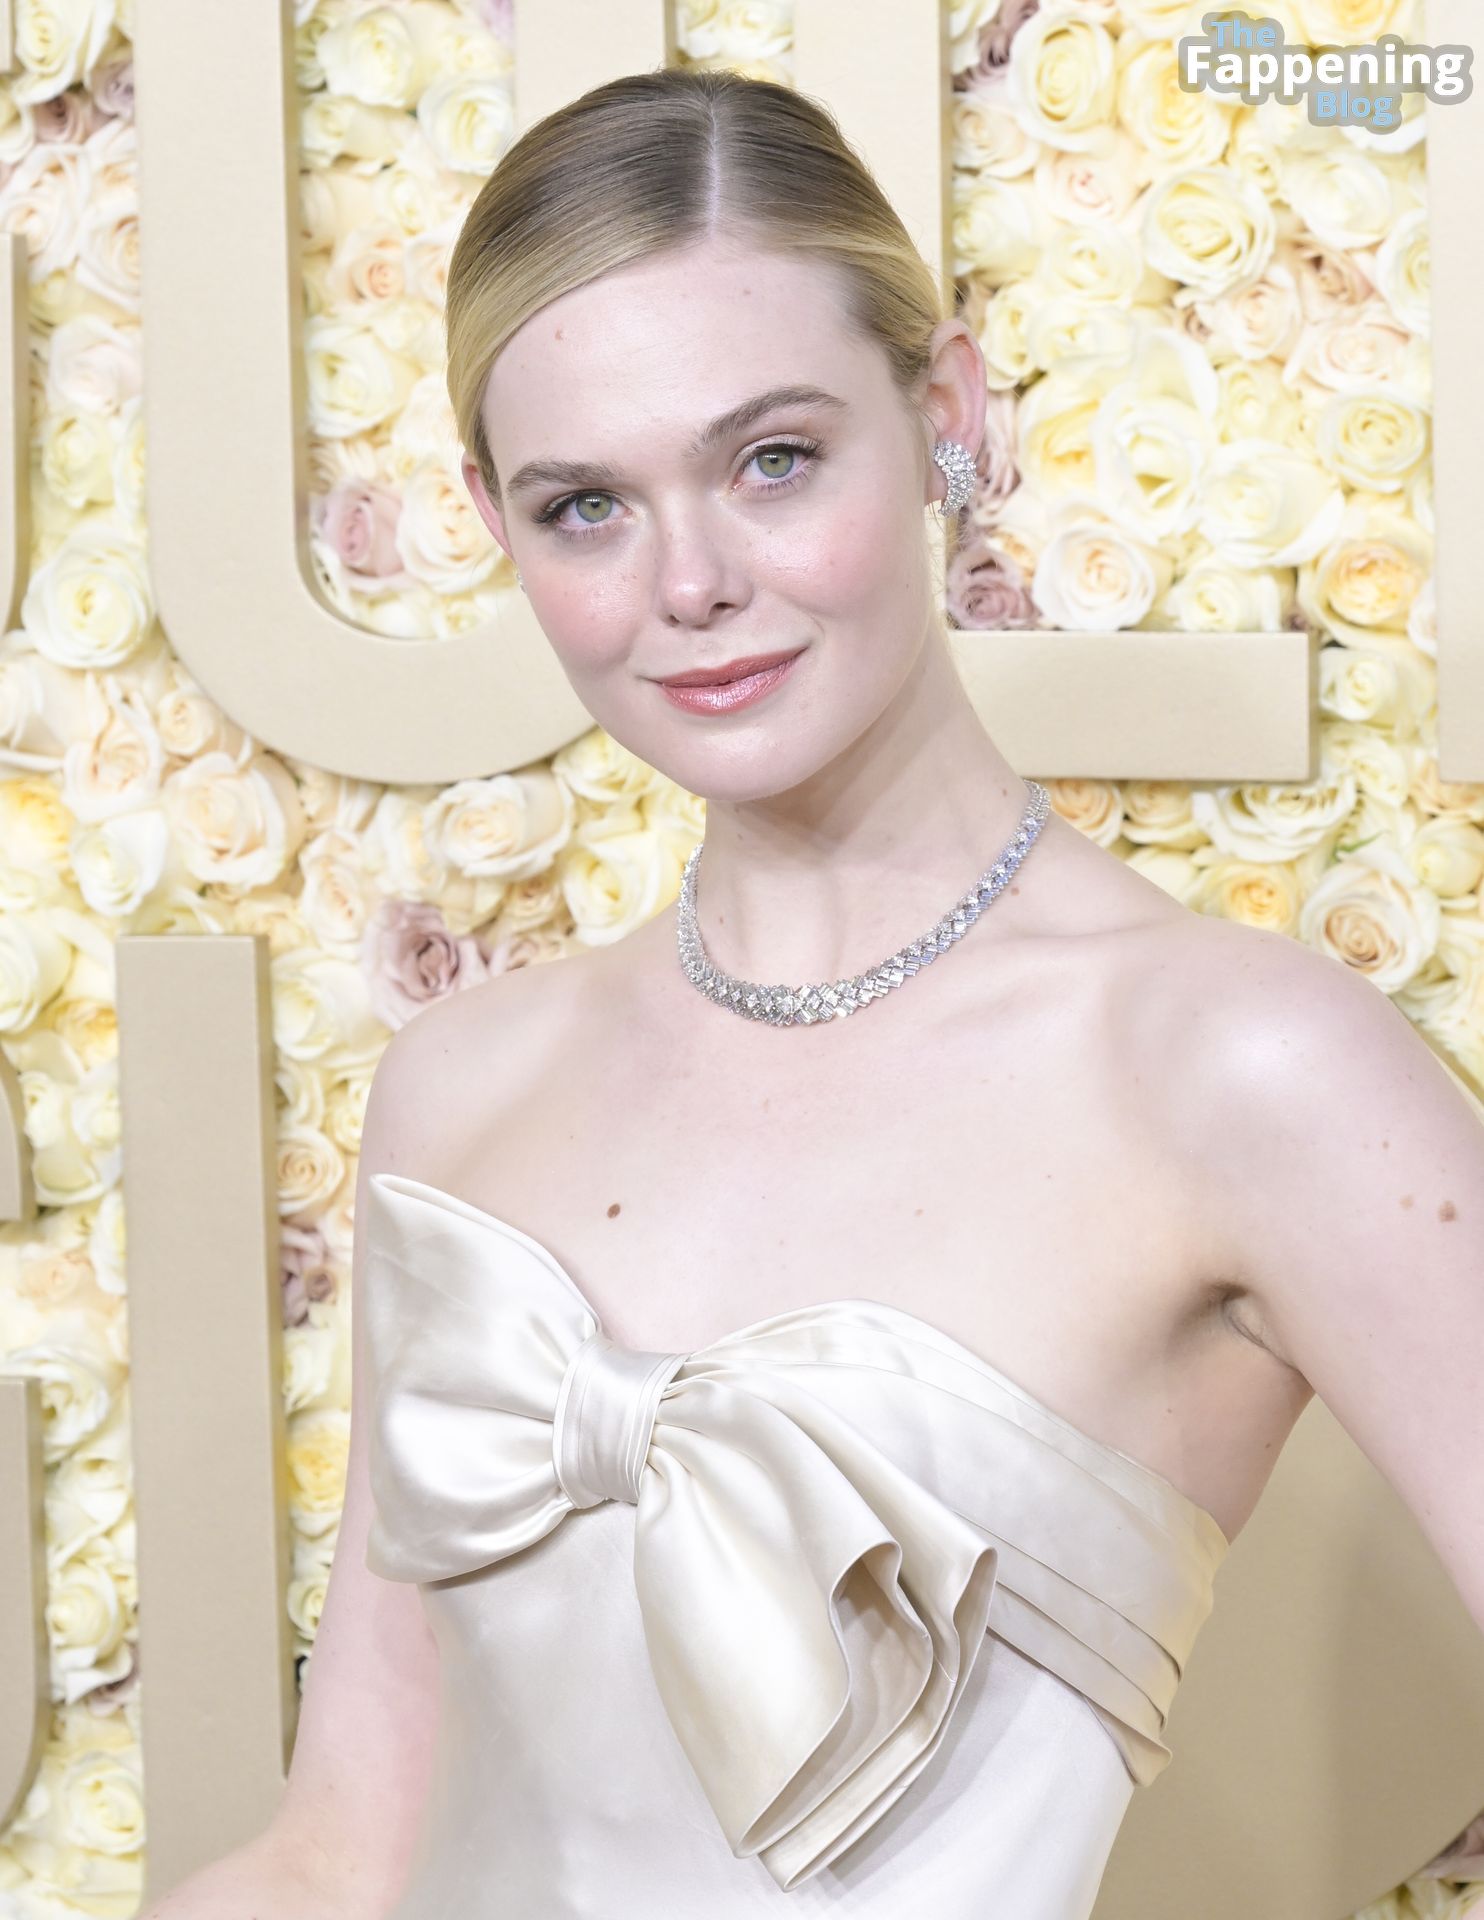 Elle-Fanning-Sexy-39-The-Fappening-Blog.jpg